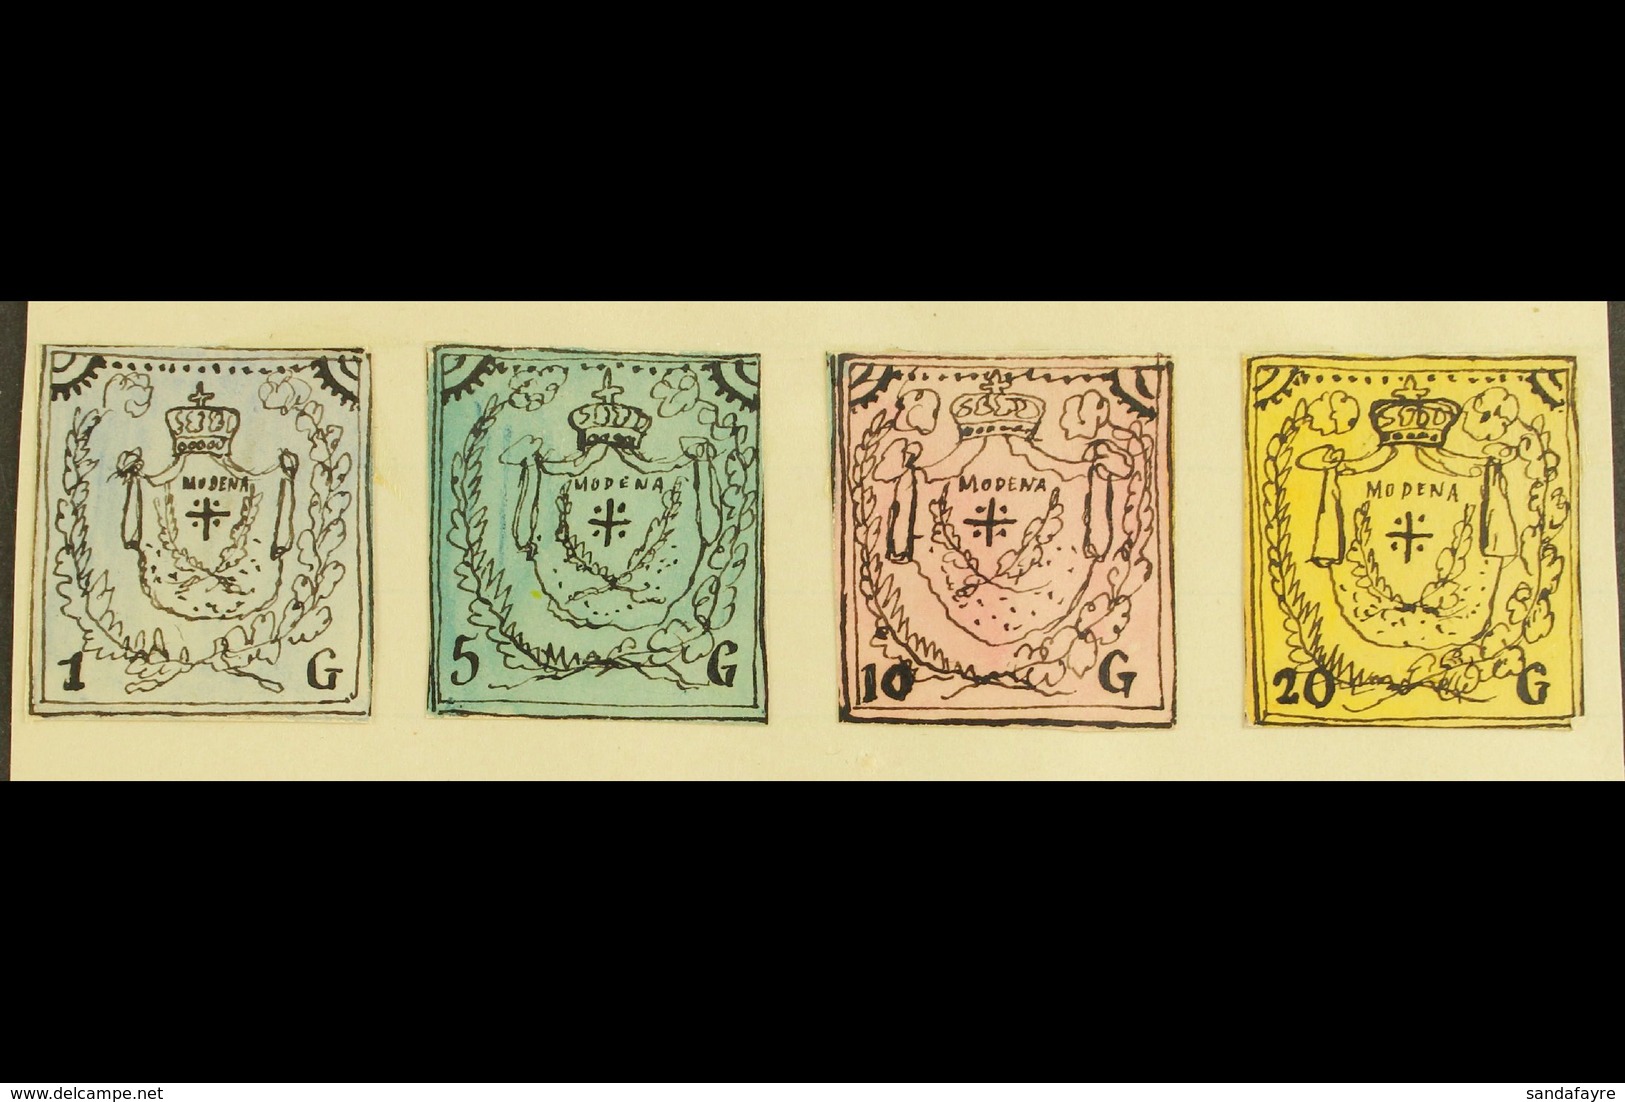 1861 HAND PAINTED STAMPS Unique Miniature Artworks Created By A French "Timbrophile" In 1861. MODENA Four Values Only Va - Non Classificati